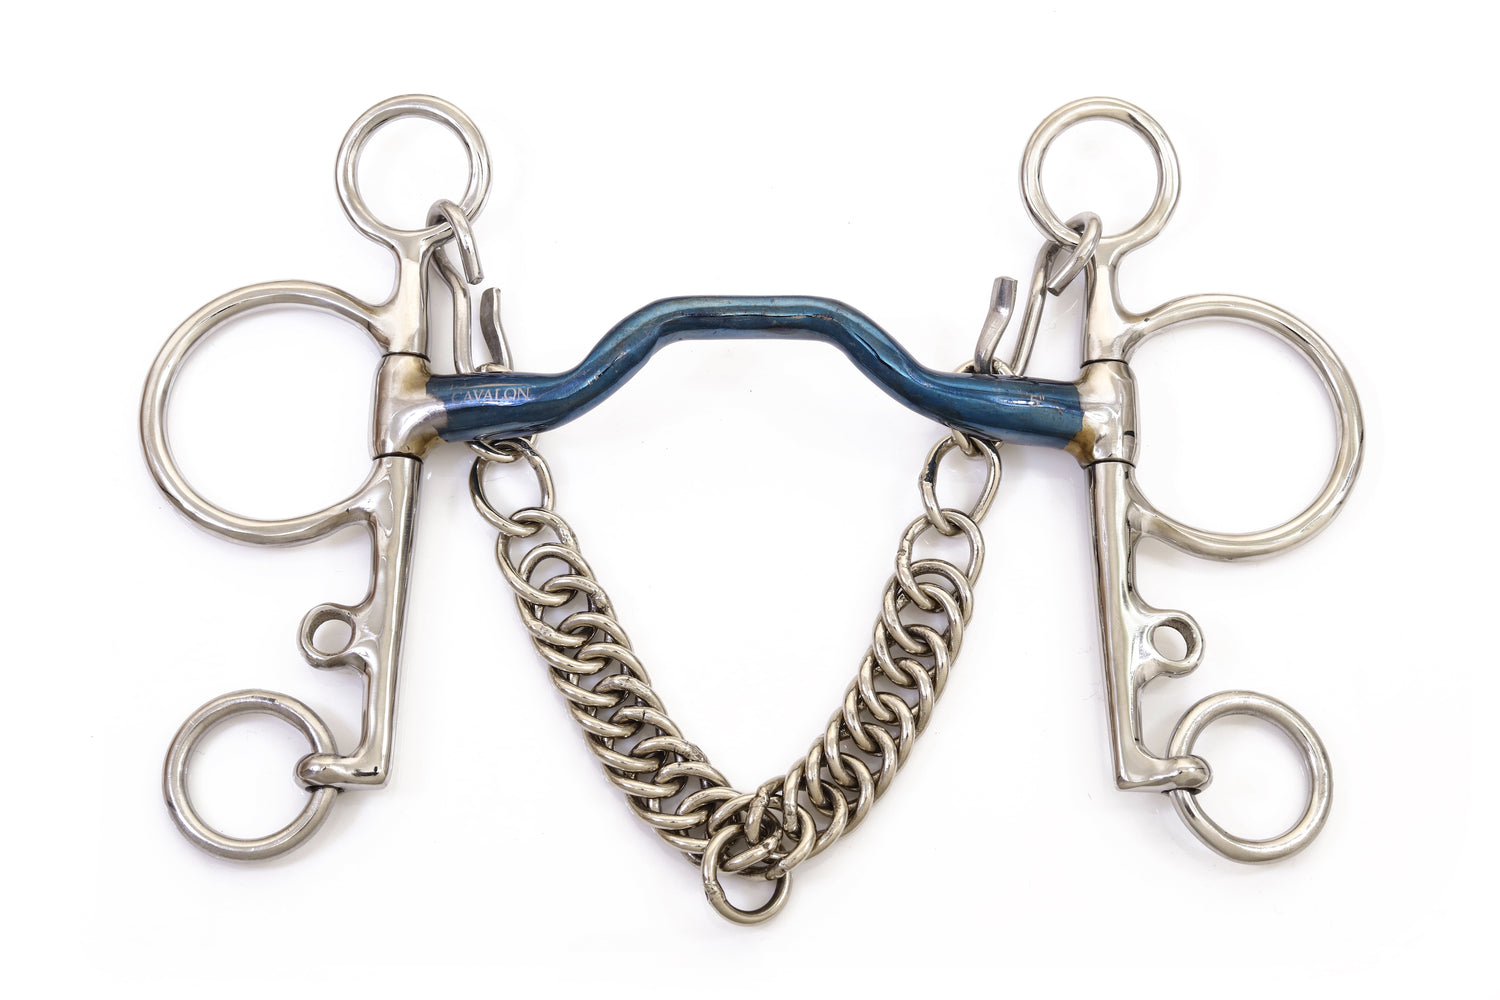 Cavalon Pelham Sweet Iron Tongue Relief Bit with Curb Chain